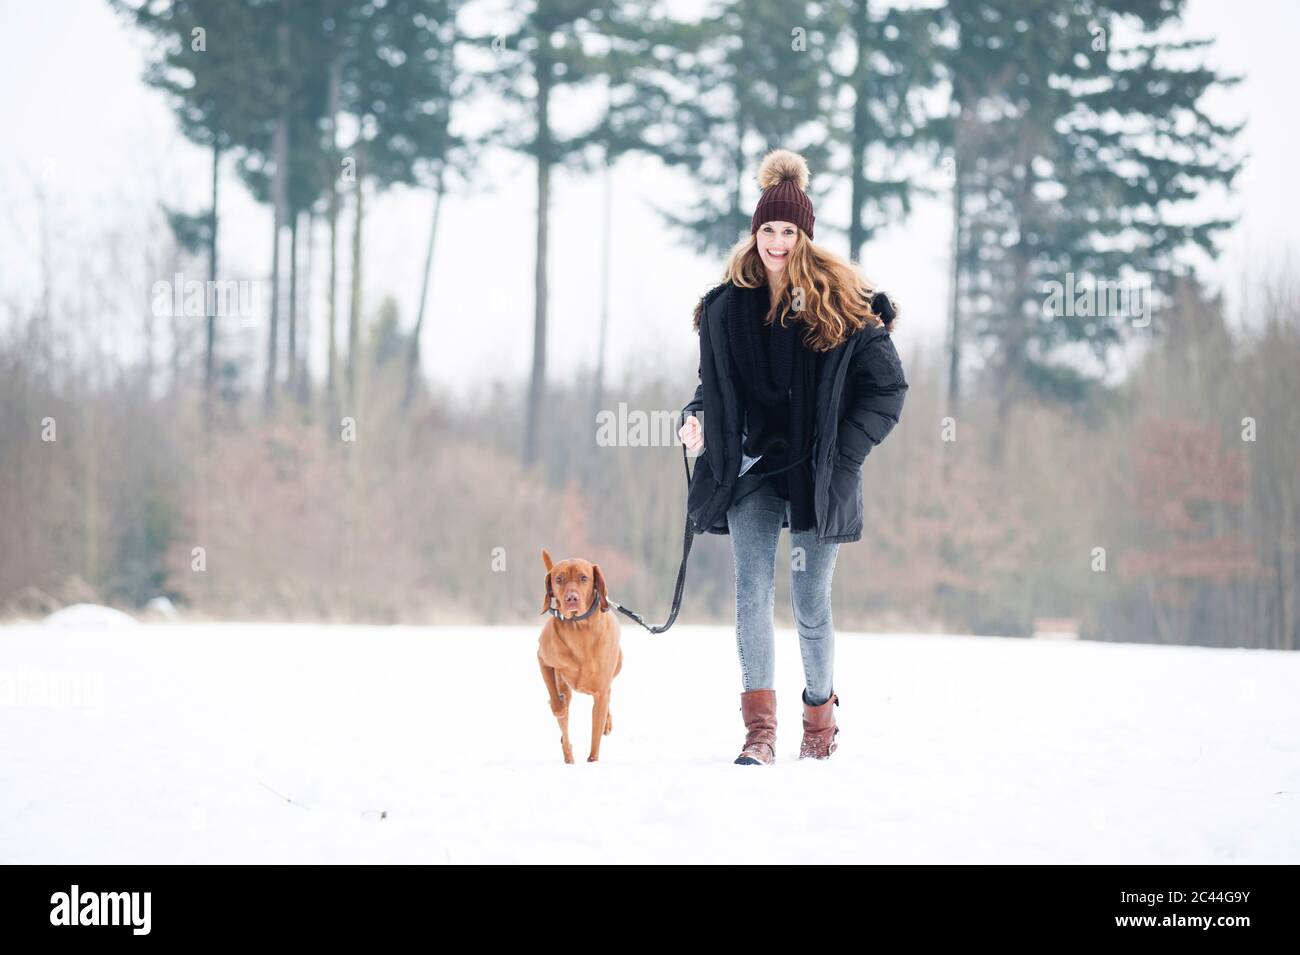 Smiling young woman walking with dog on snow against trees in forest Stock Photo